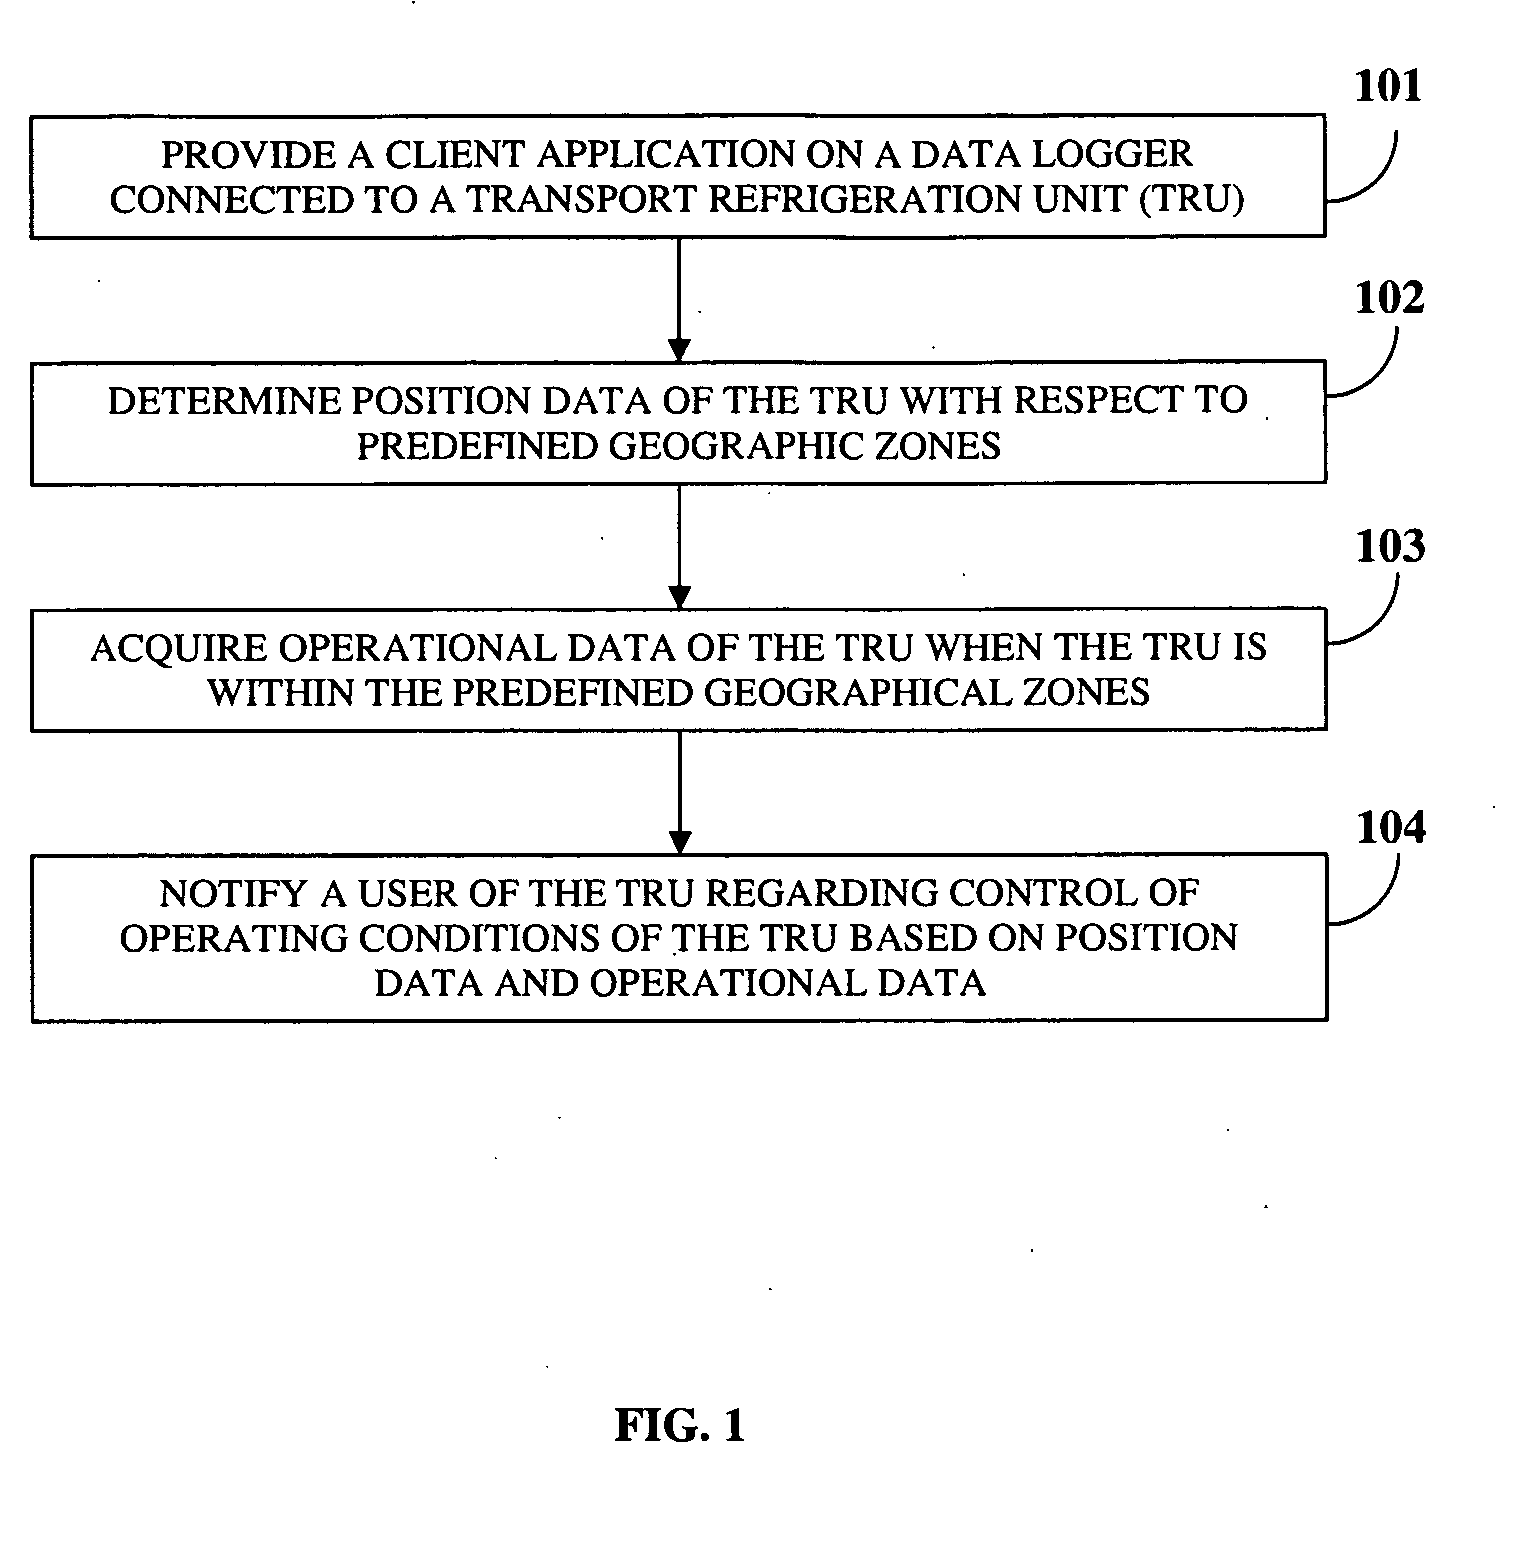 Position Based Operational Tracking Of A Transport Refrigeration Unit